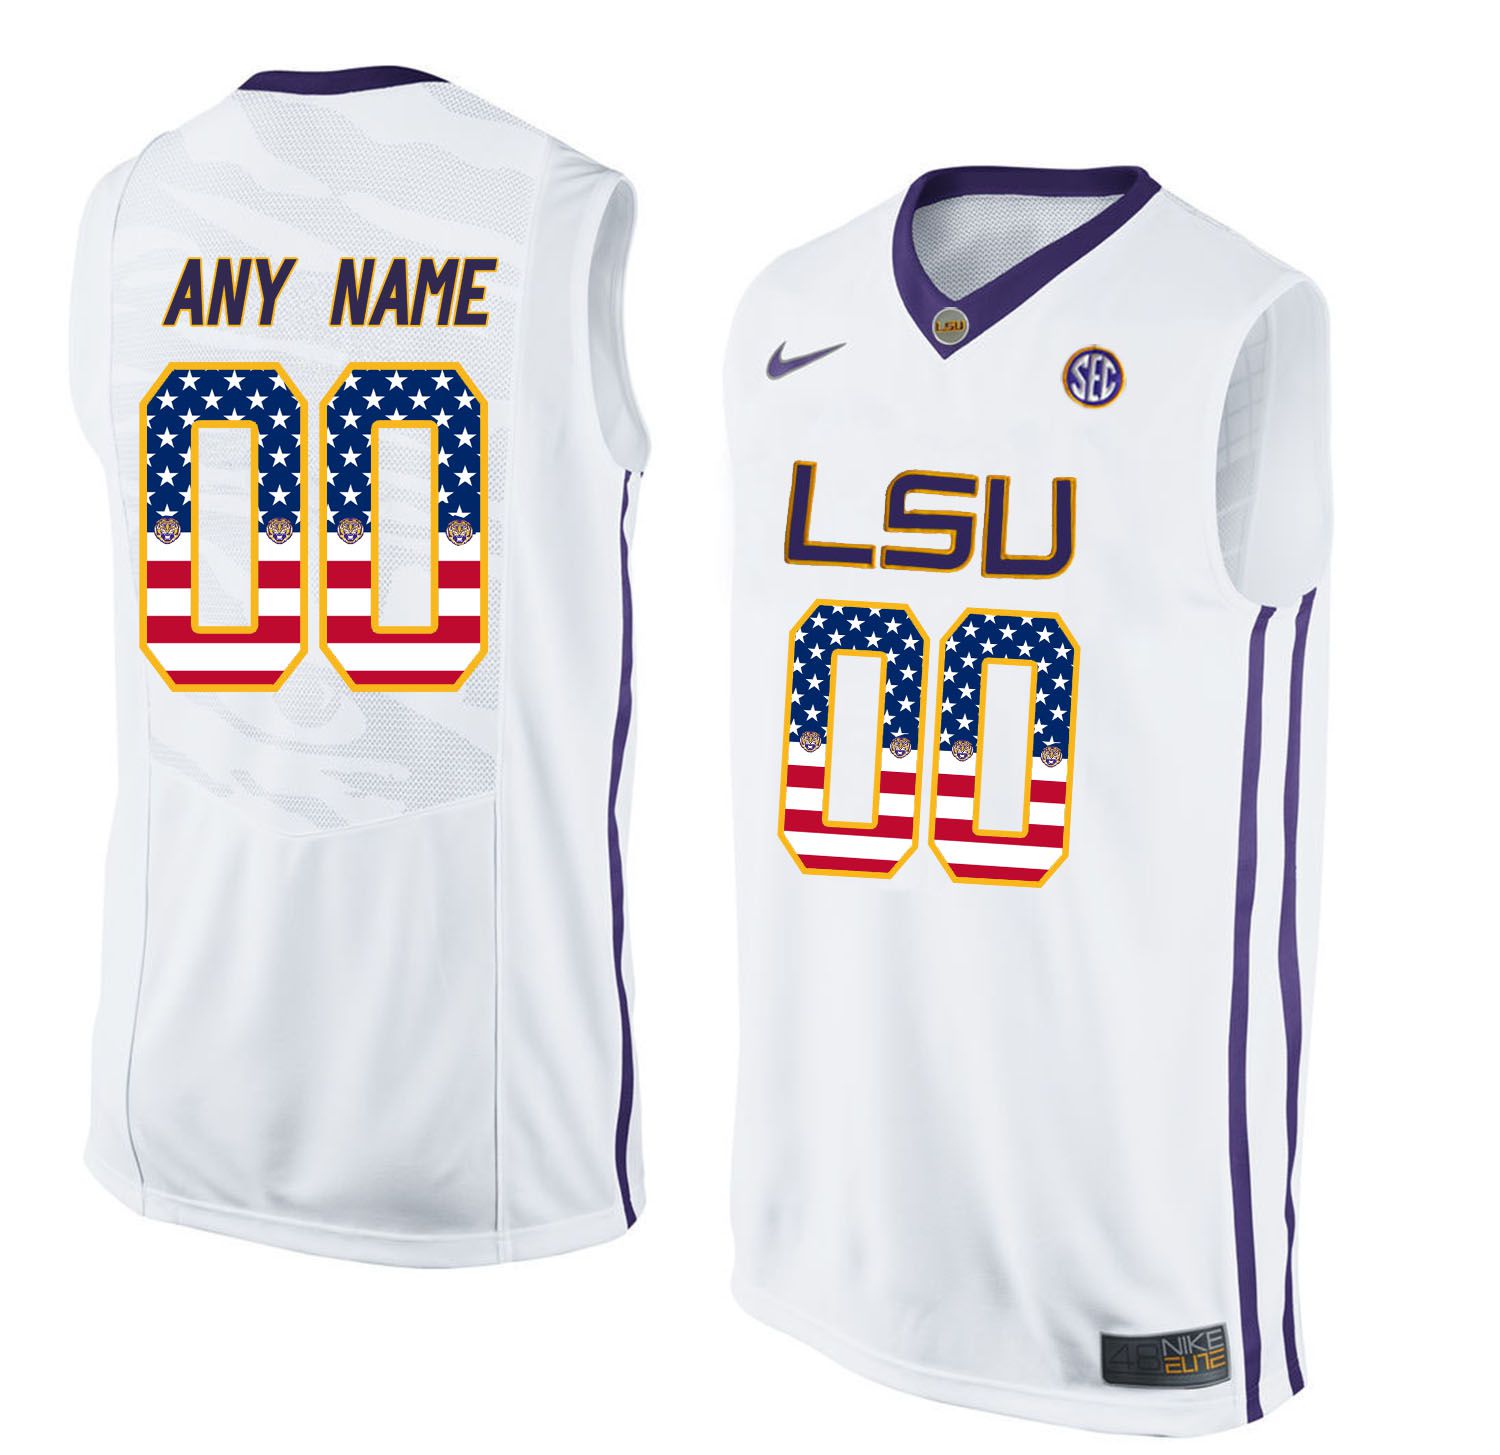 Men LSU Tigers 00 Any name White Flag Customized NCAA Jerseys1